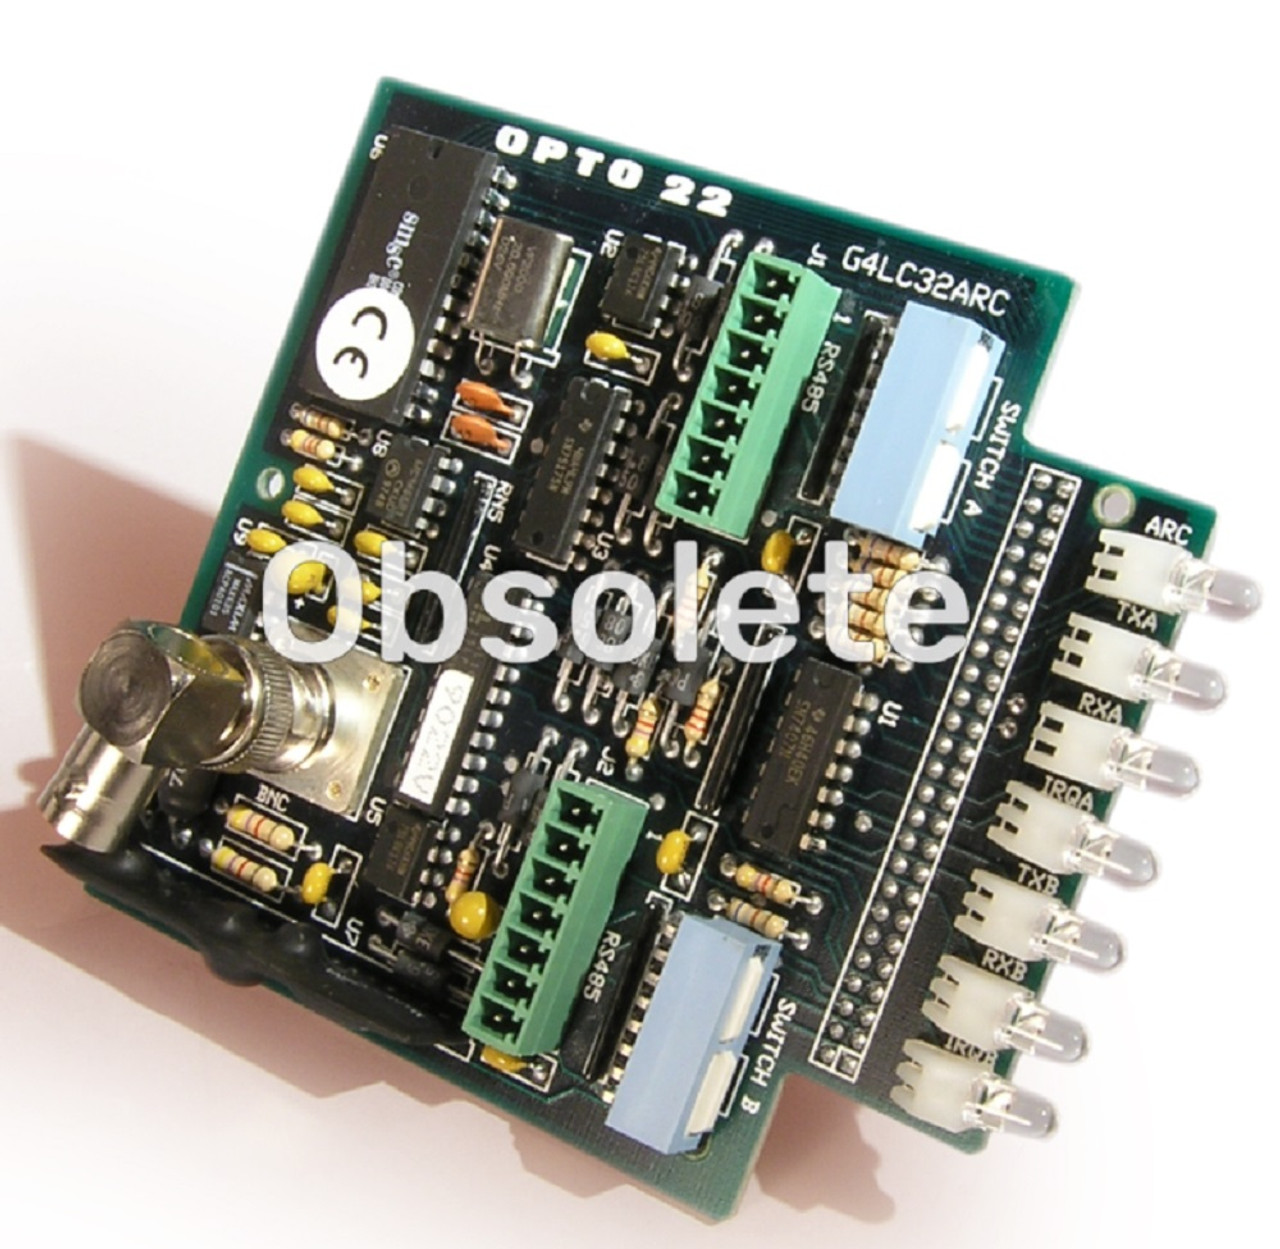 Opto 22 G4LC32ARC Classic ARCNET Adapter For G4LC32SX [New]